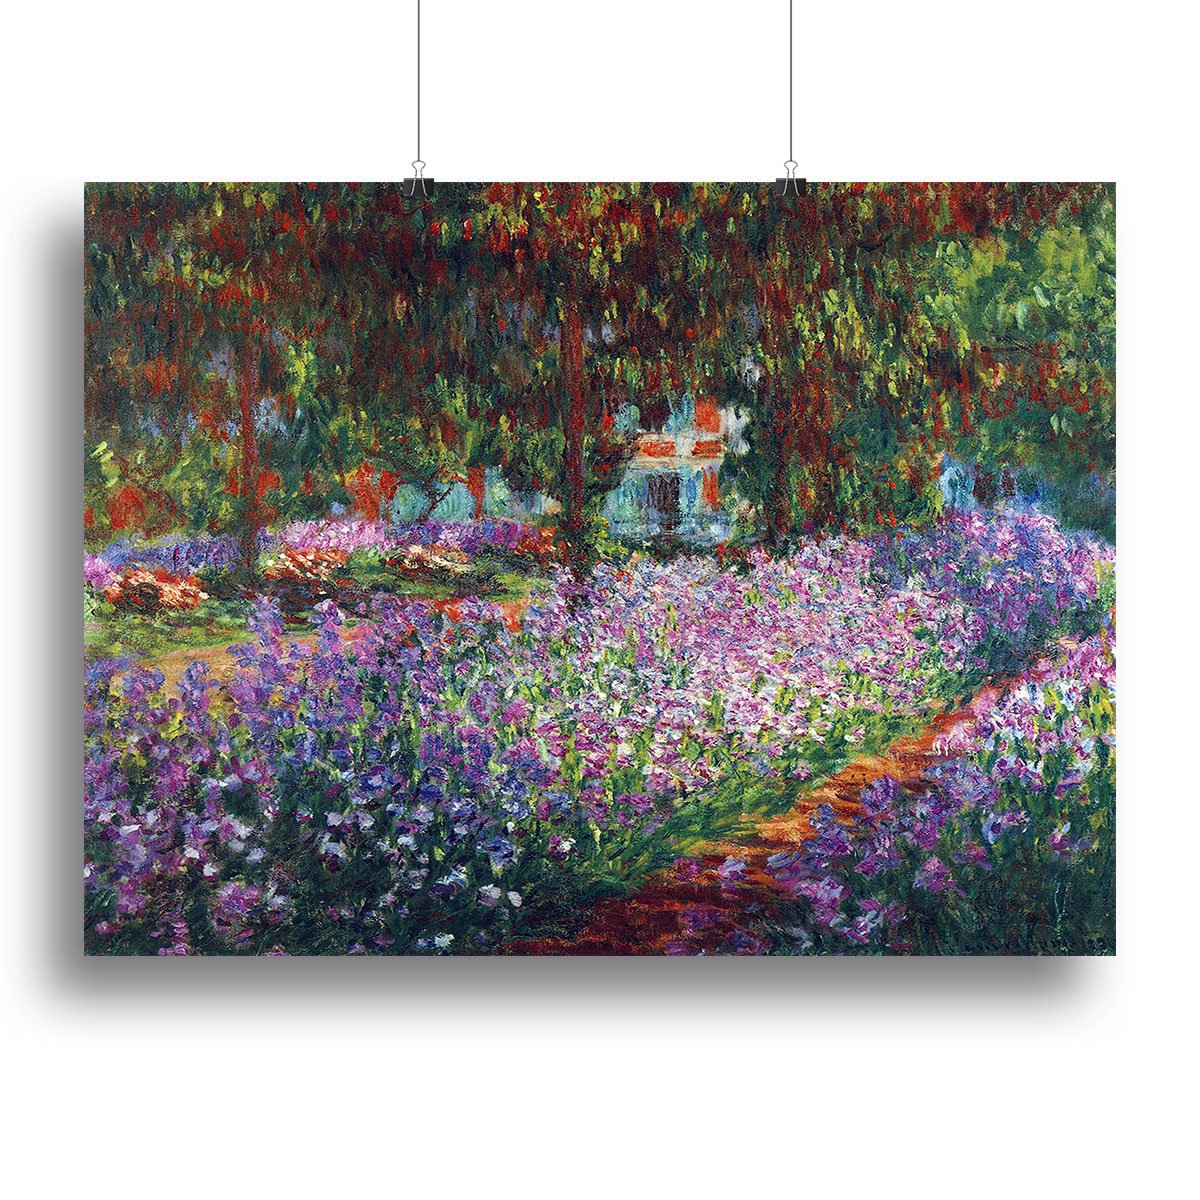 Monet's garden in Giverny by Monet Canvas Print or Poster